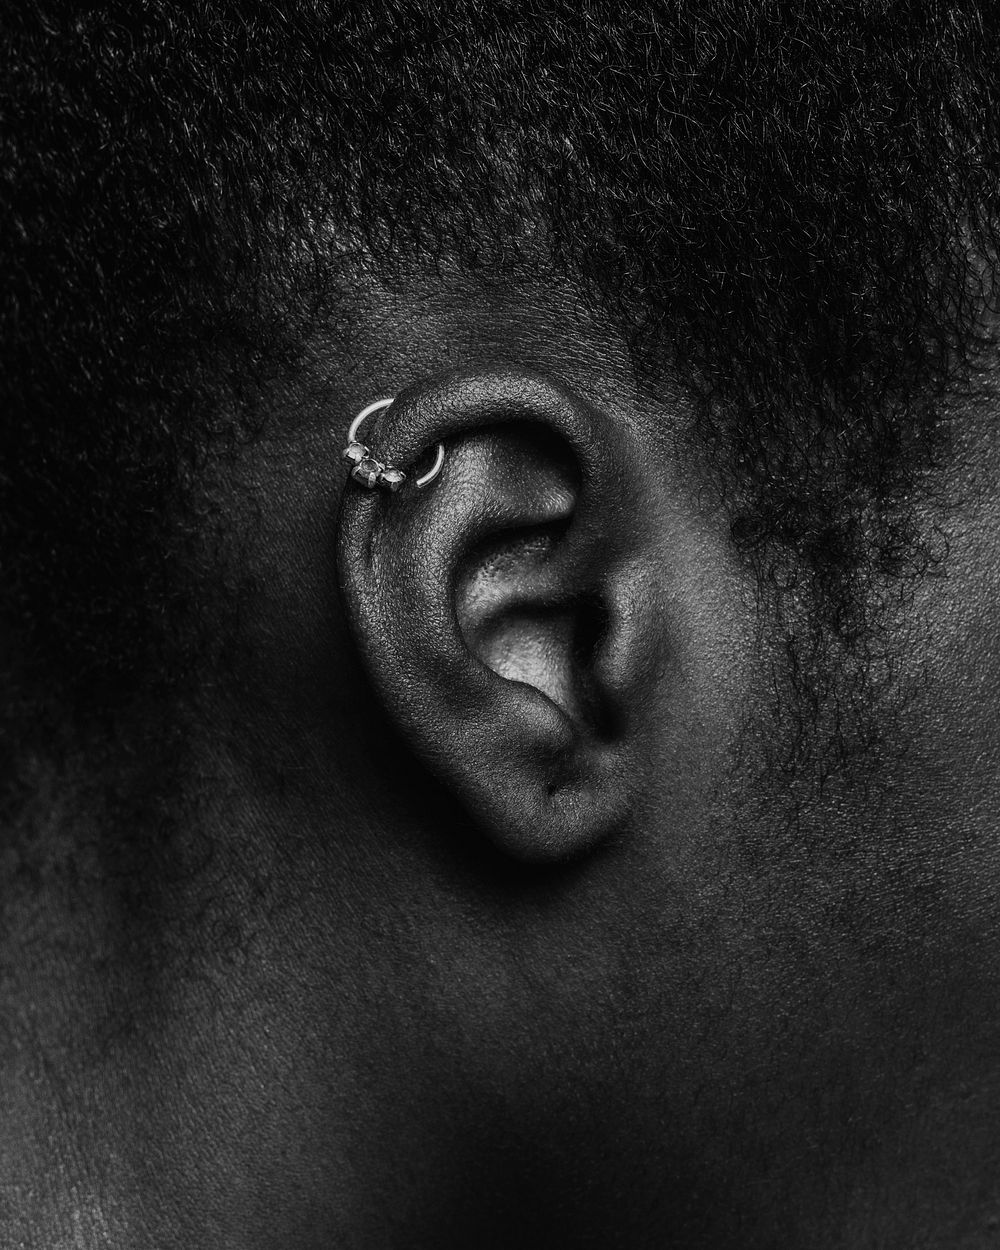 African woman wearing ear piercing, black and white photo